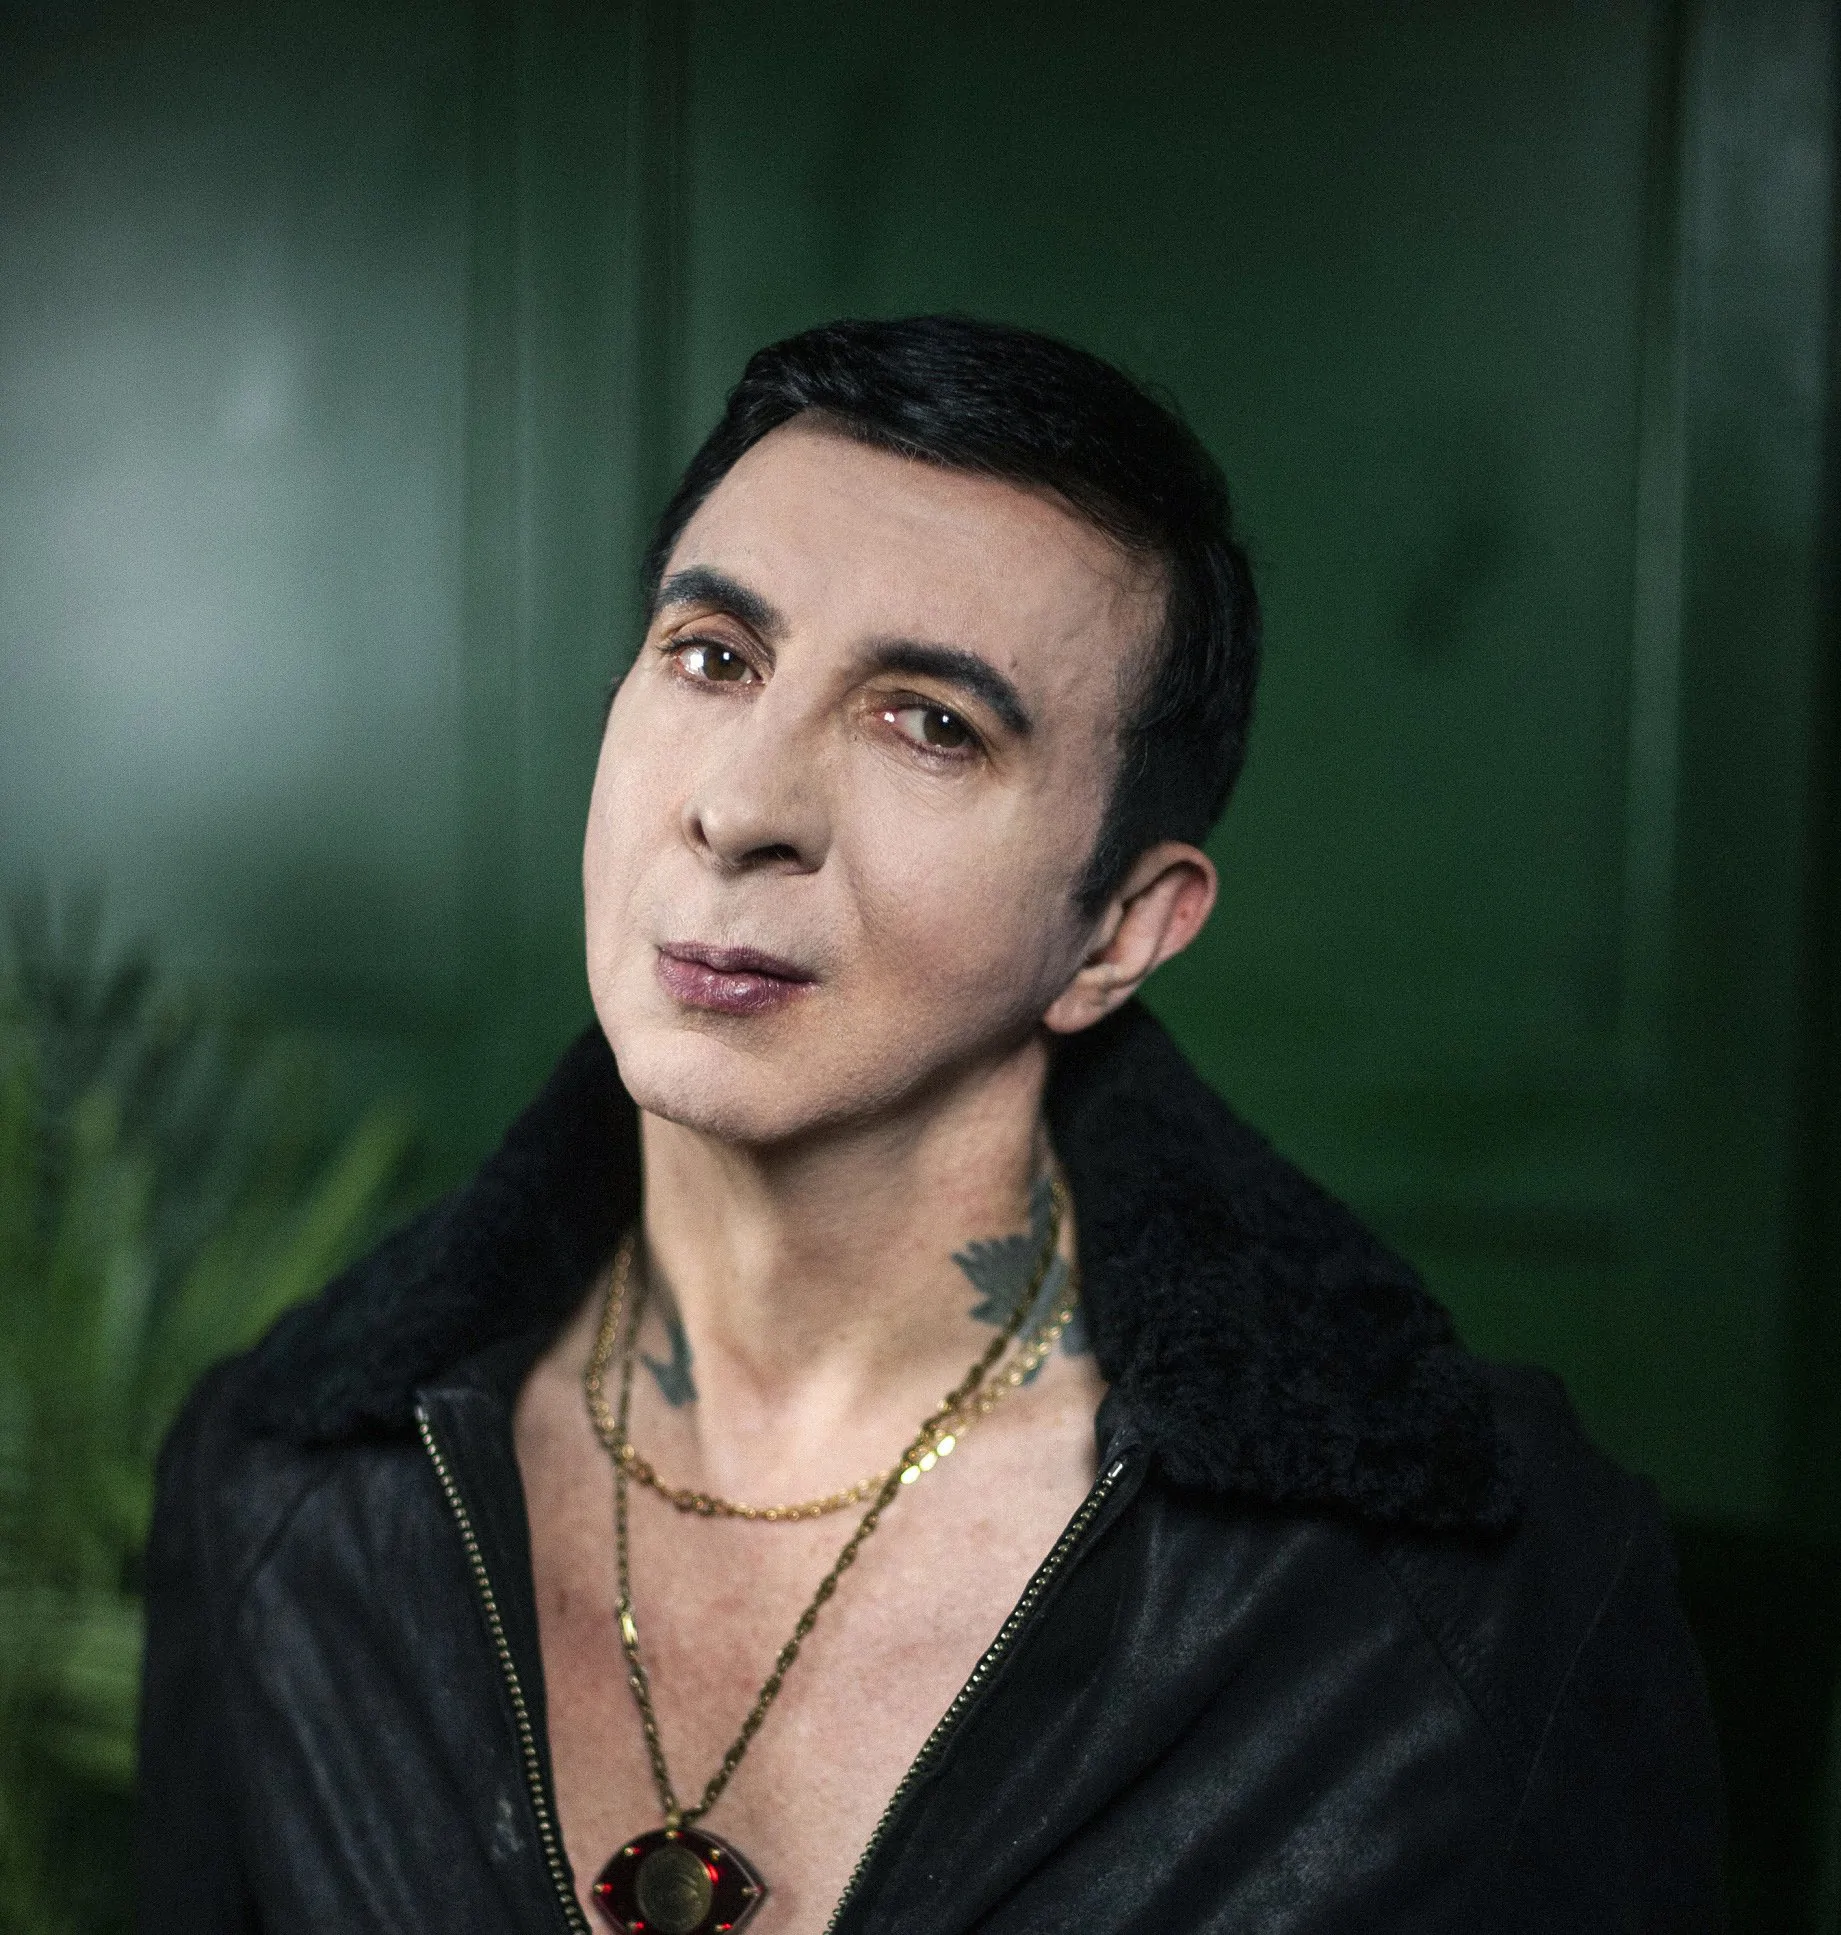 MARC ALMOND announces his rescheduled tour dates for October 2022